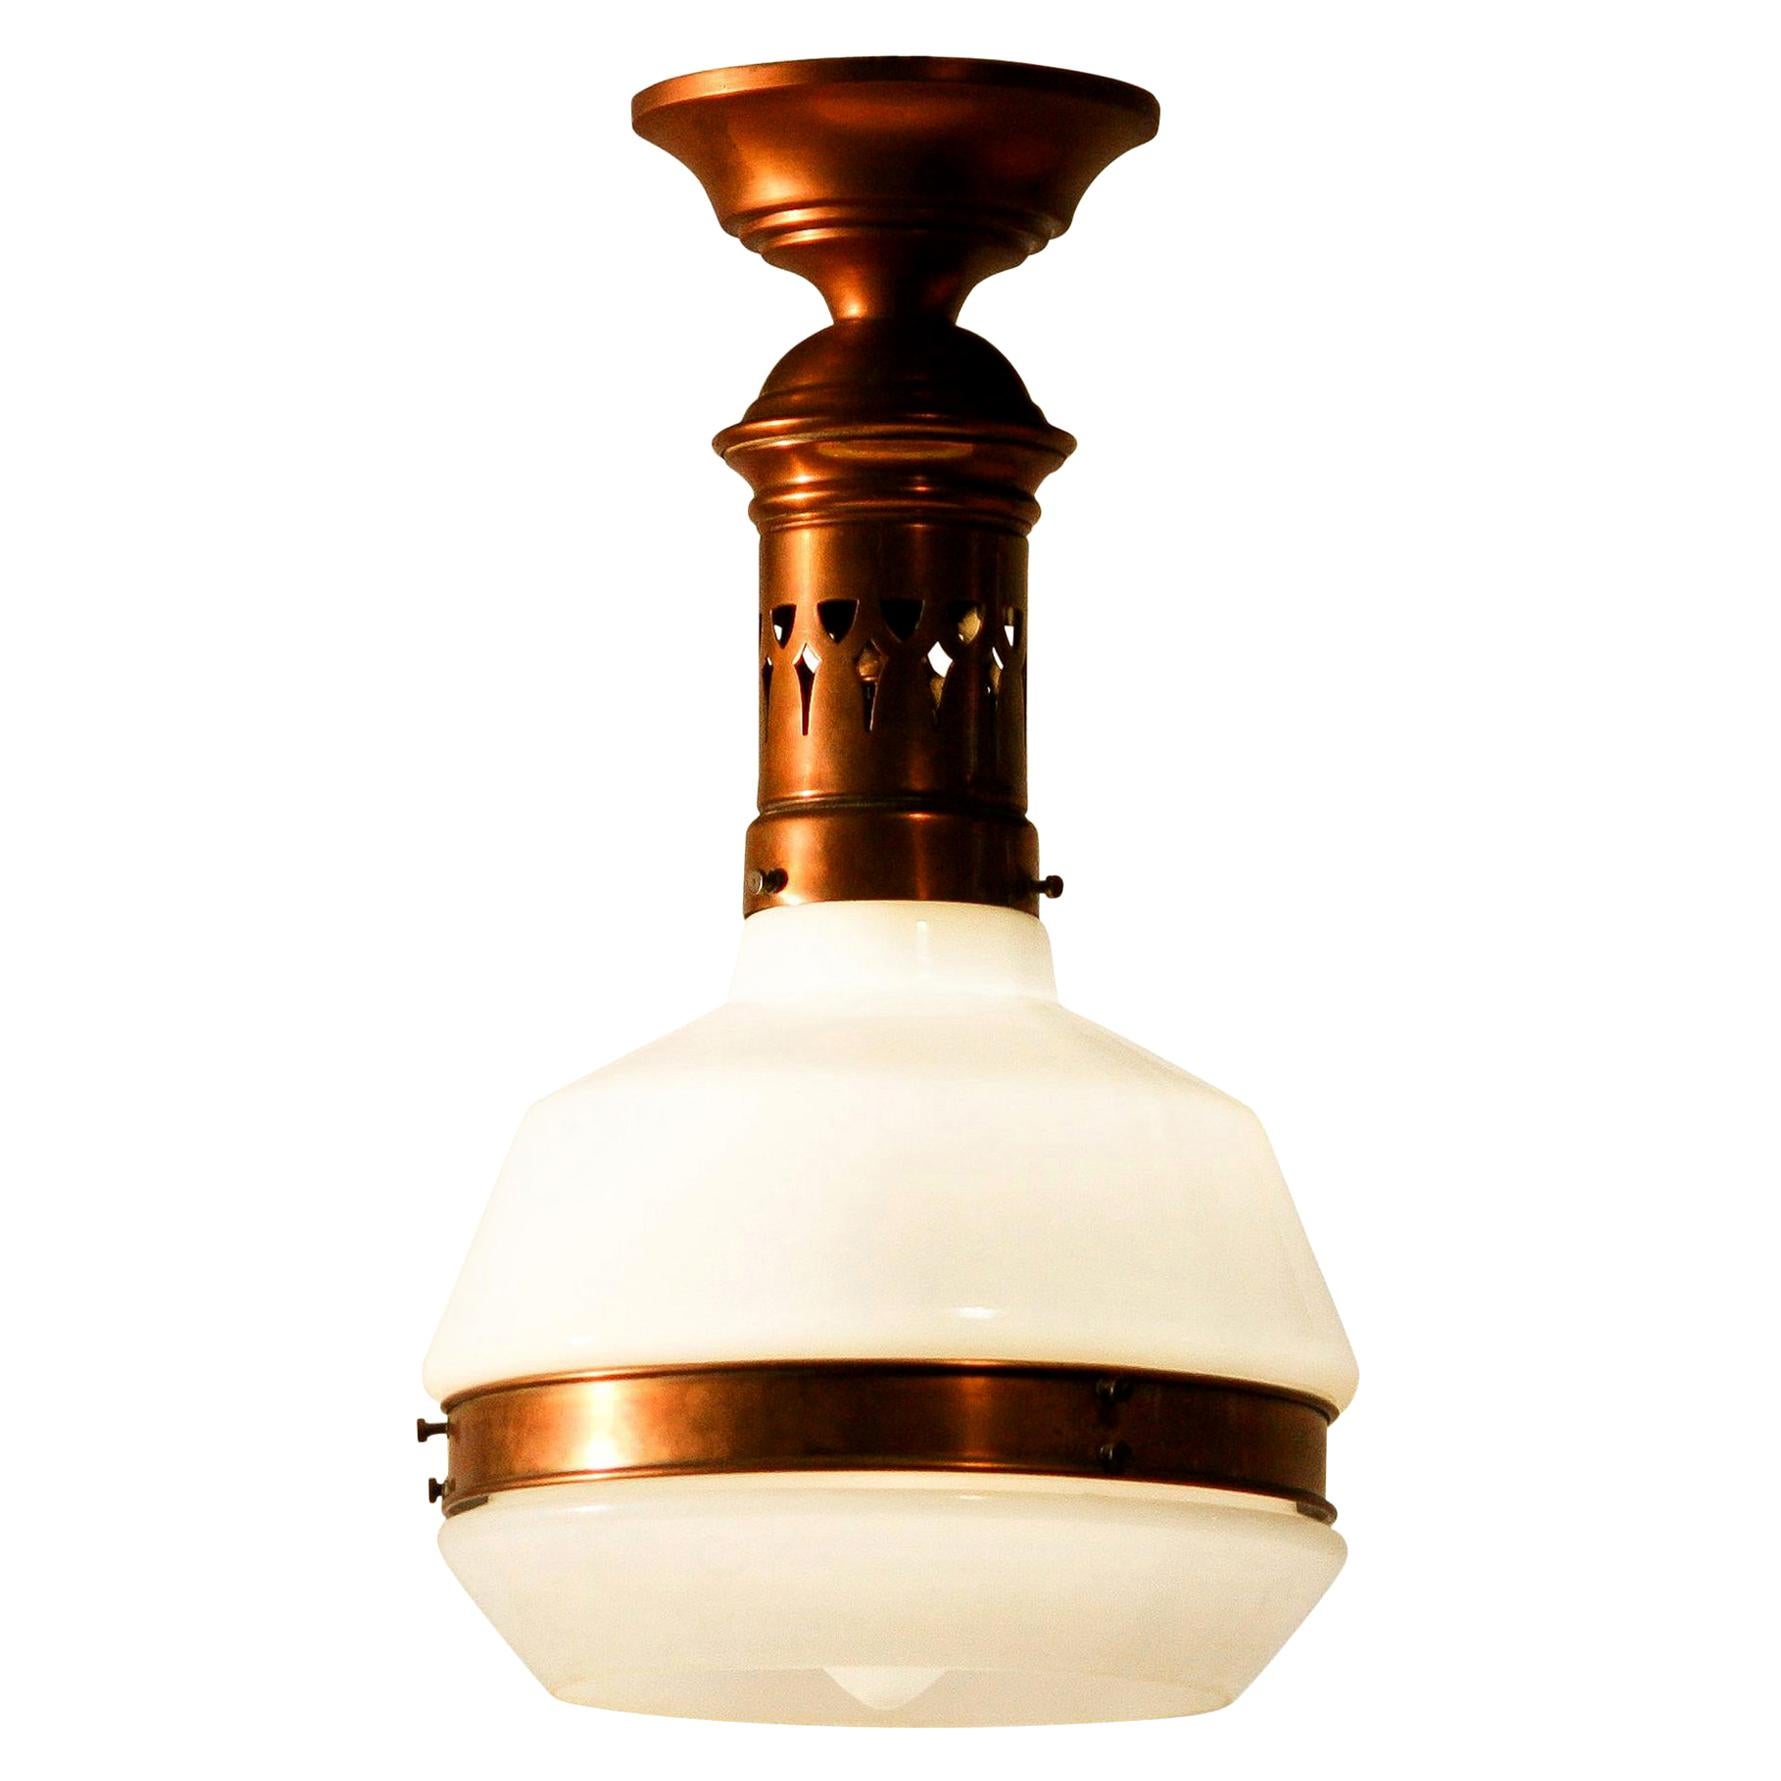 Beautiful Art Deco red copper pendant lamp with white satin finish glass hood.
In absolutely perfect condition.

   